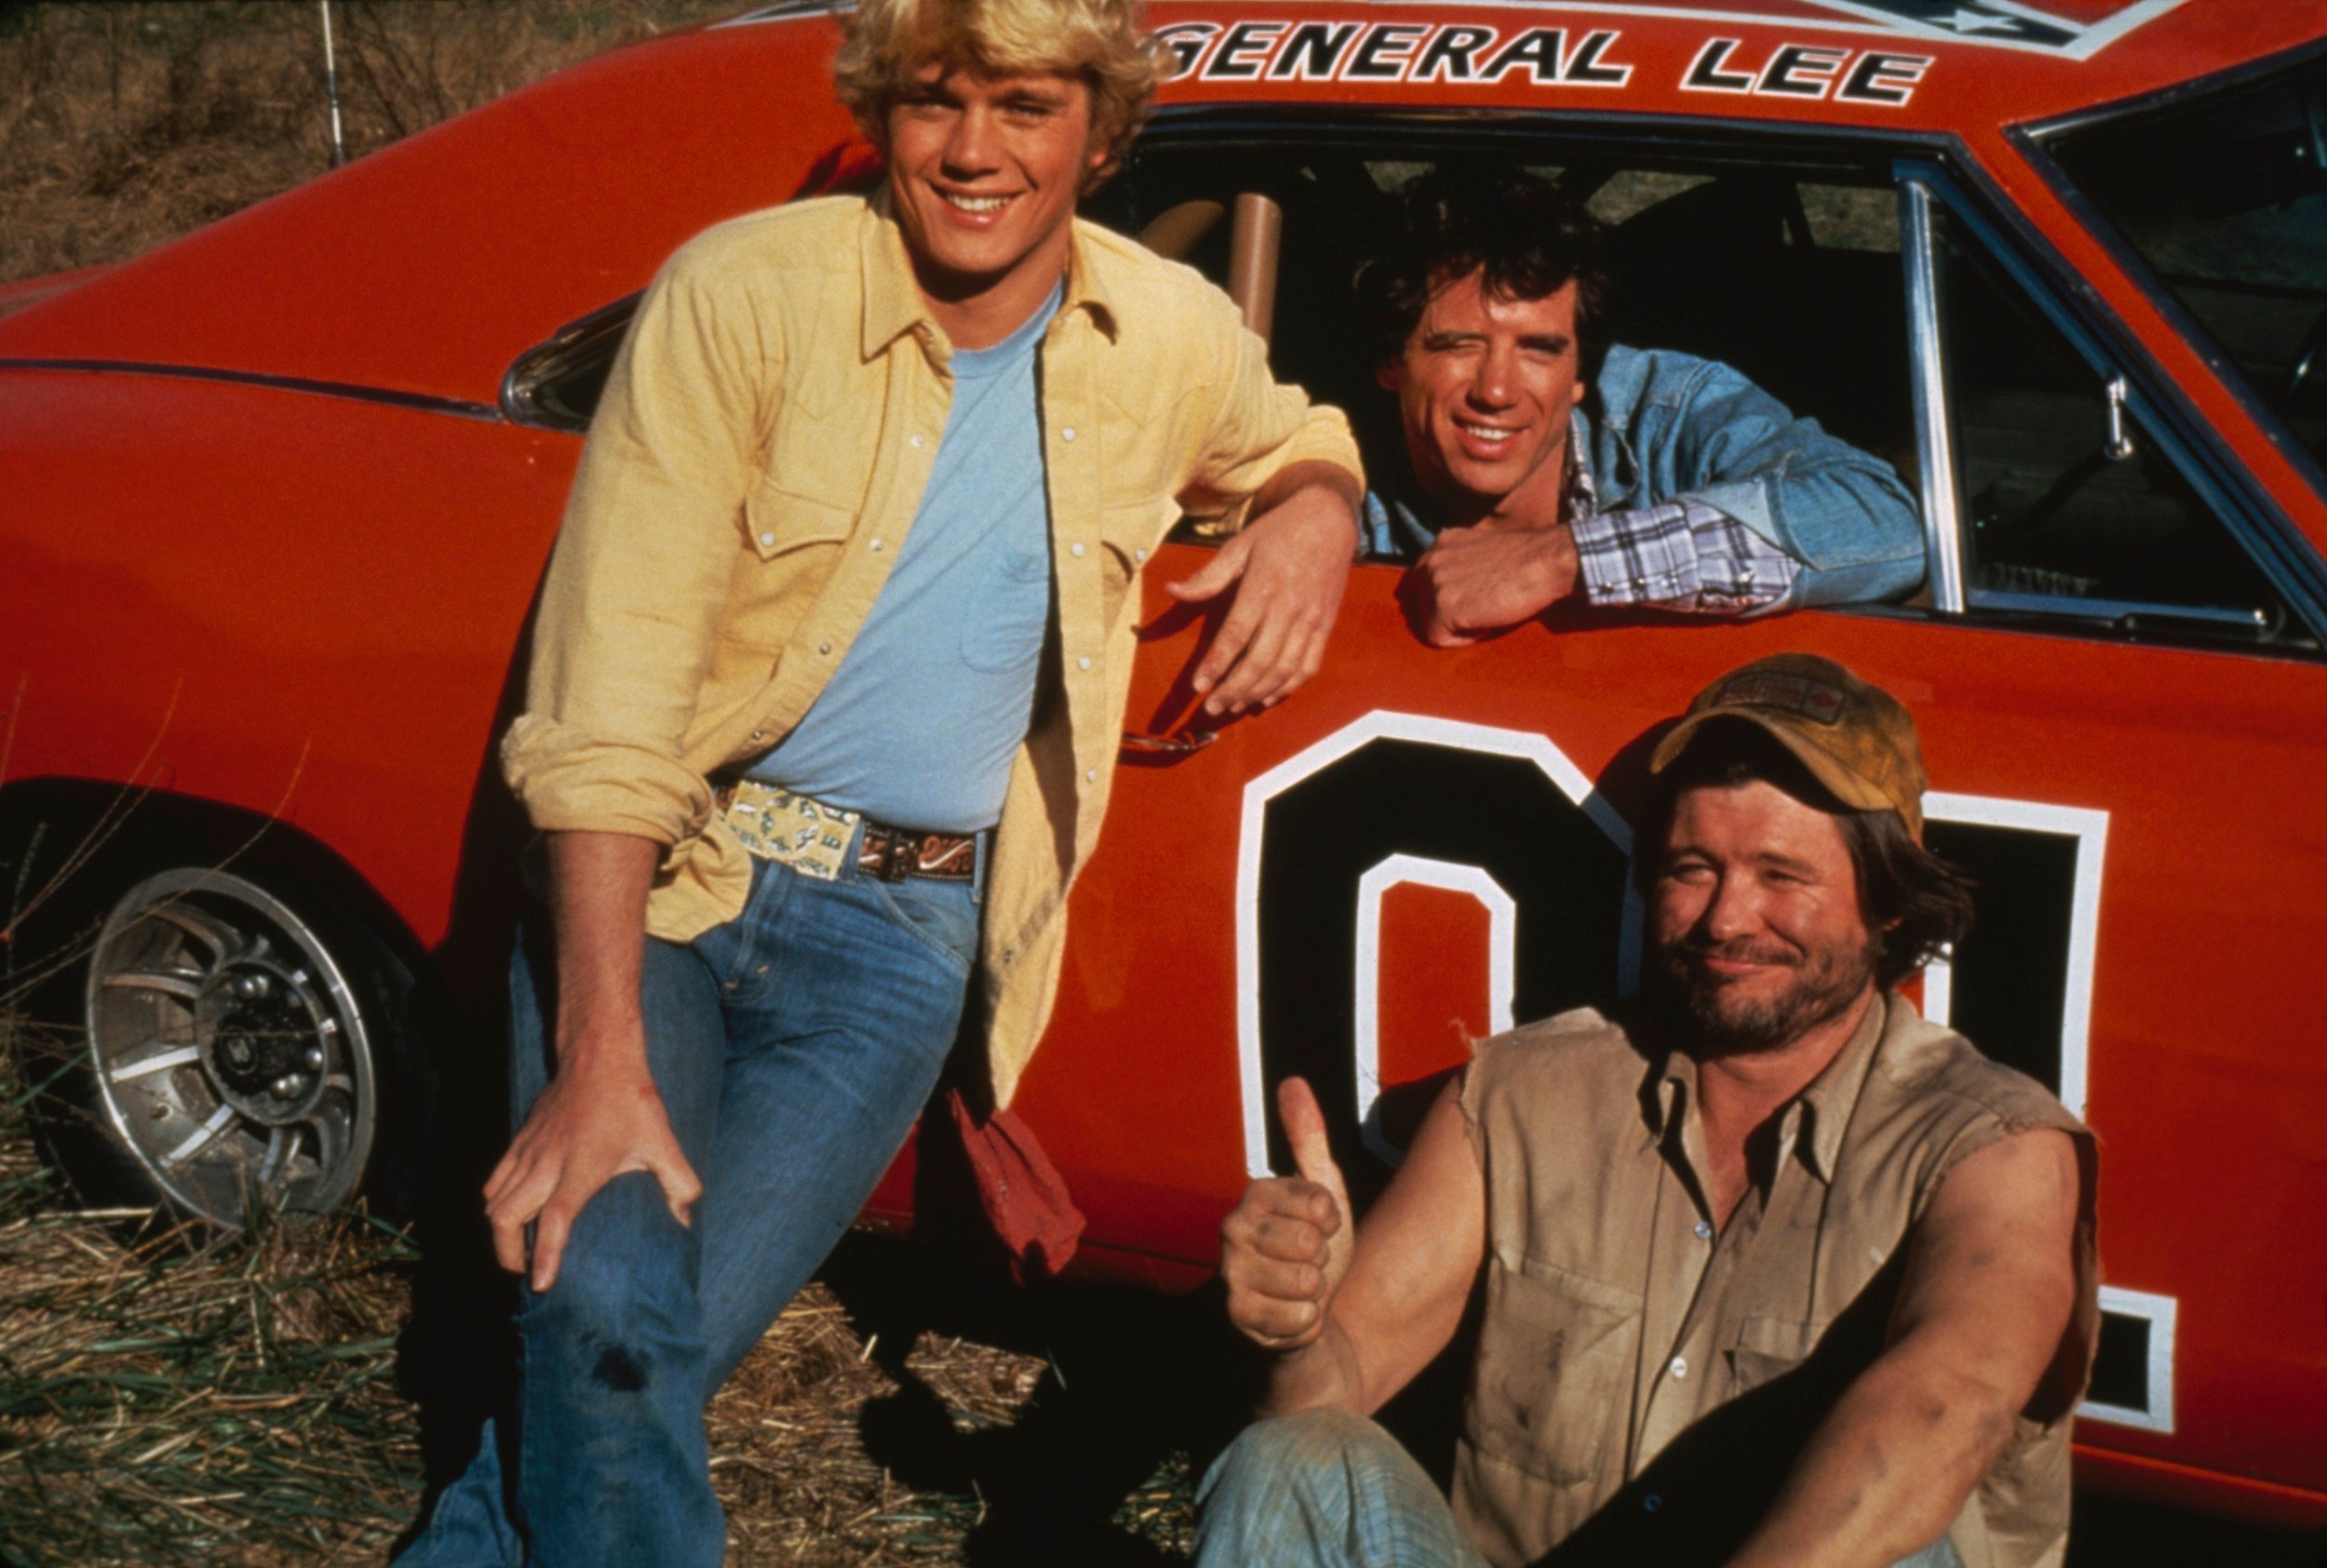 John Schneider, Tom Wopat, and Ben Jones as Bo Duke, Luke Duke, and Cooter in The Dukes of Hazzard. They are posing with the General Lee car, a 1969 Dodge Charger.